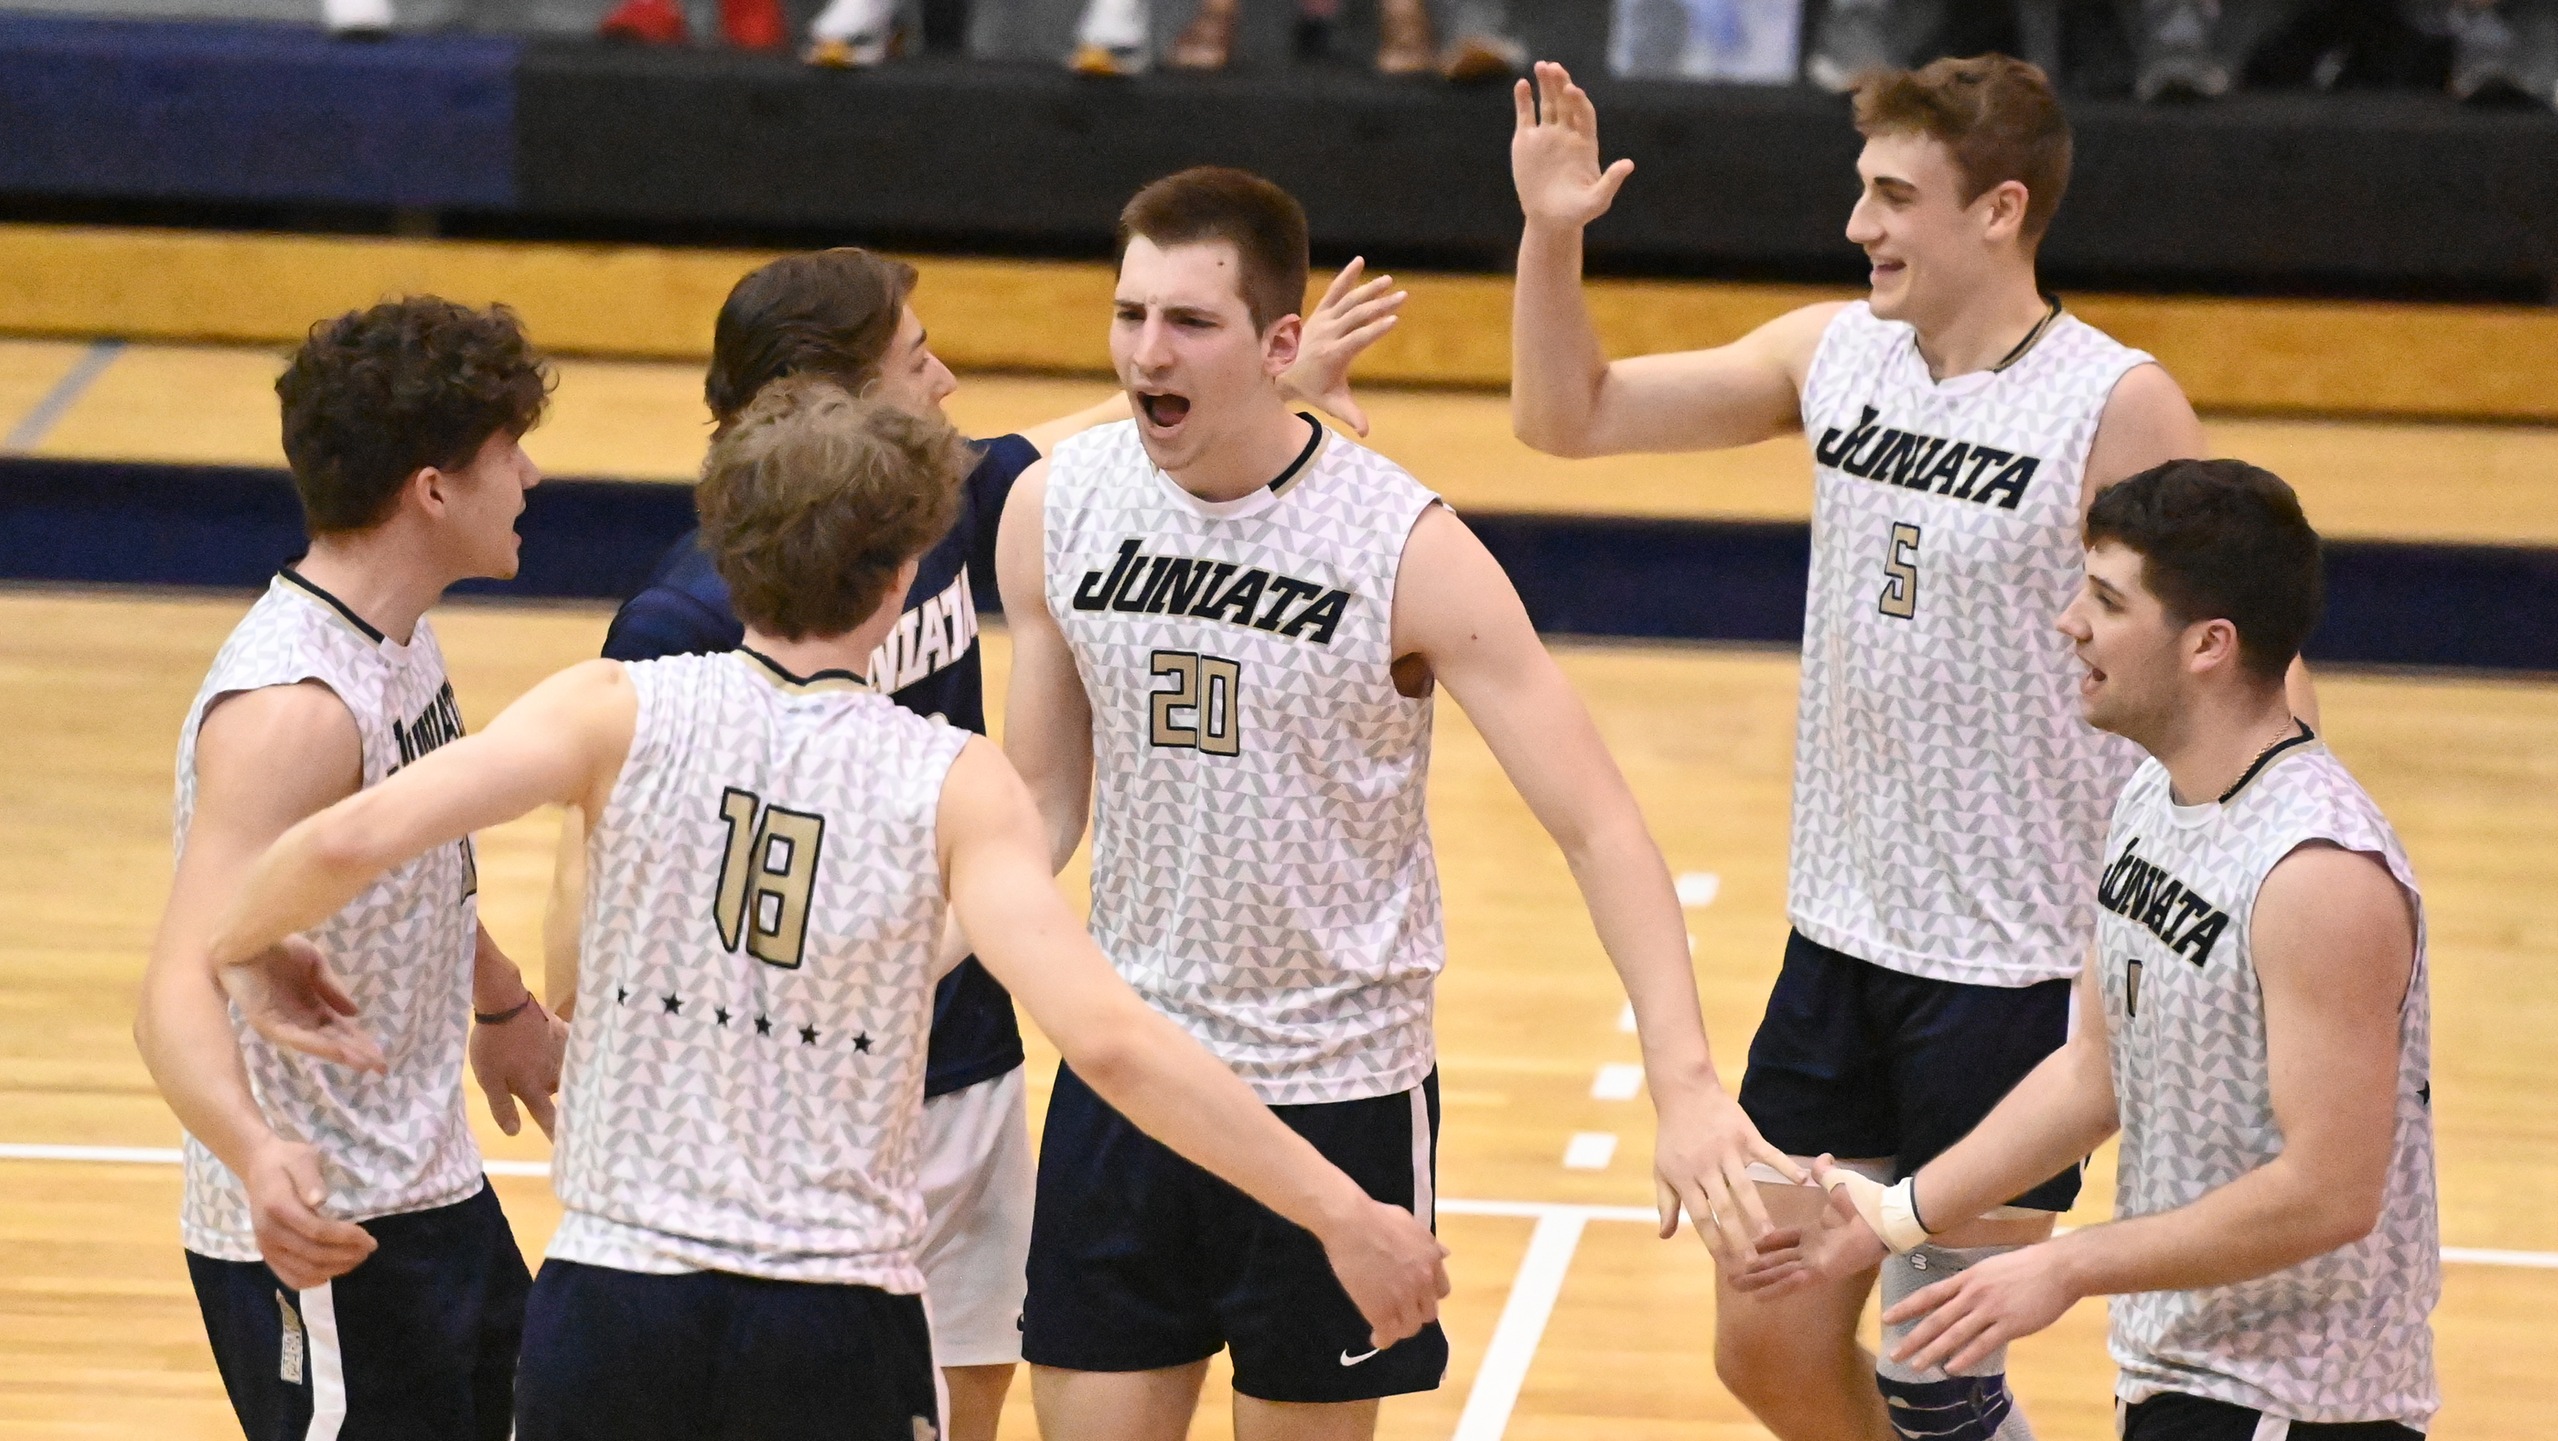 Men's Volleyball Sweeps Kean, Advances to CVC Semifinals for a Showdown with Southern Virginia